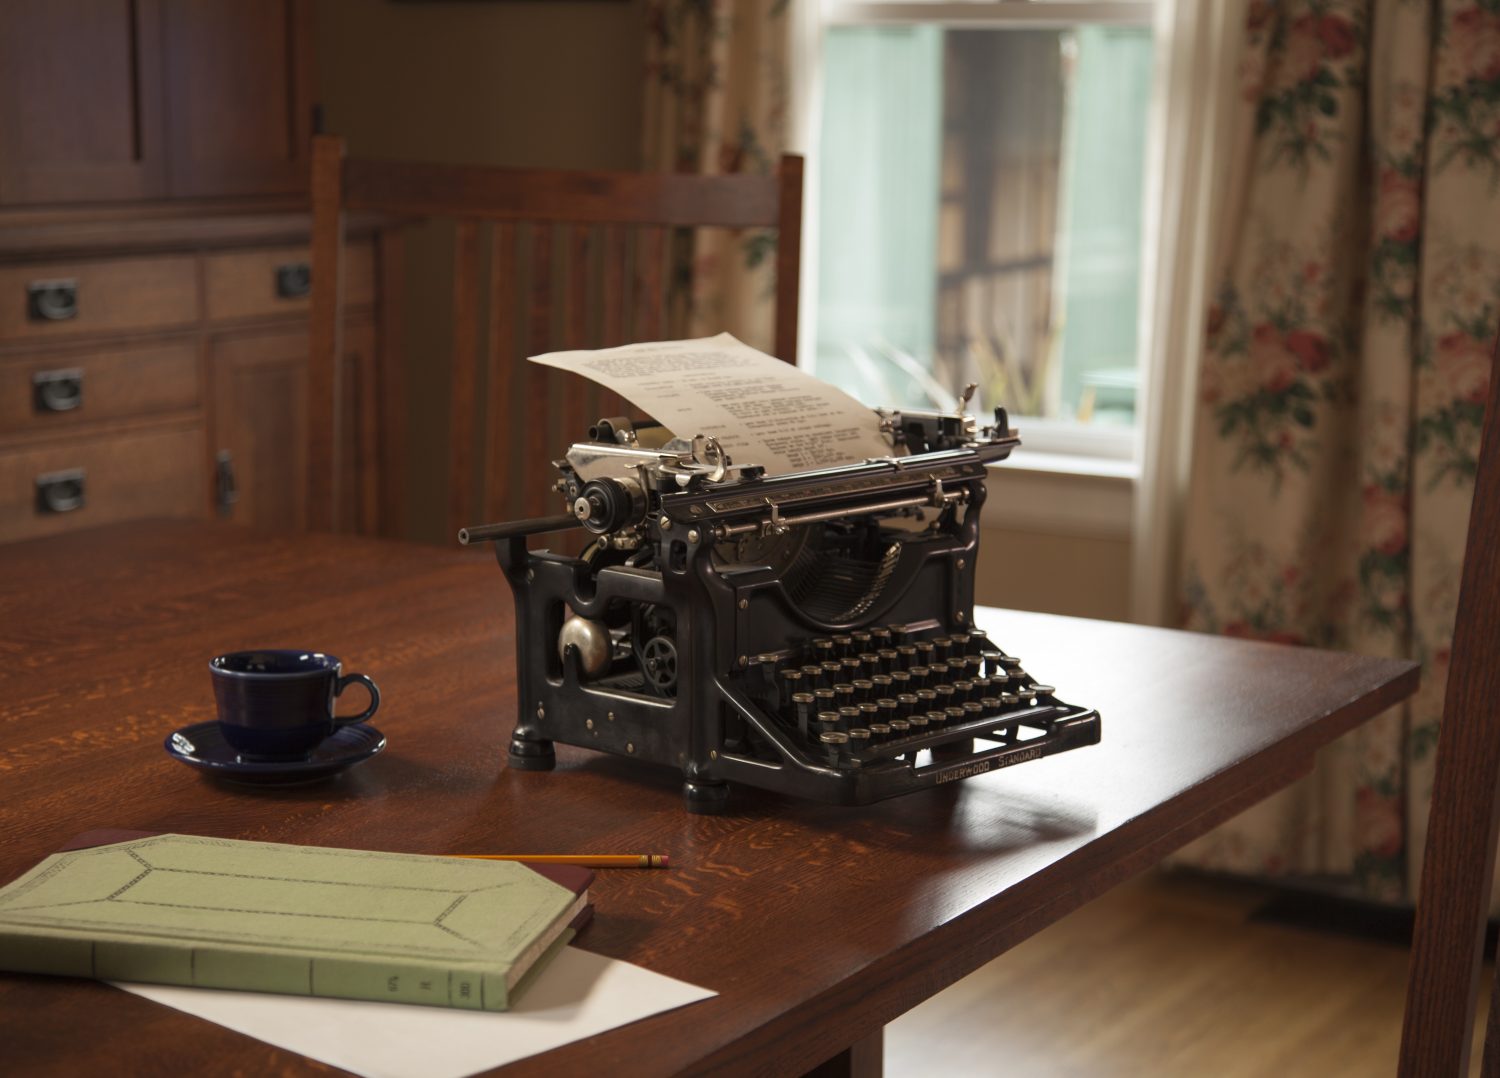 Underwood typewriter used to recreate Addison Avenue house's dining room, which Lucile Packard used as an office.